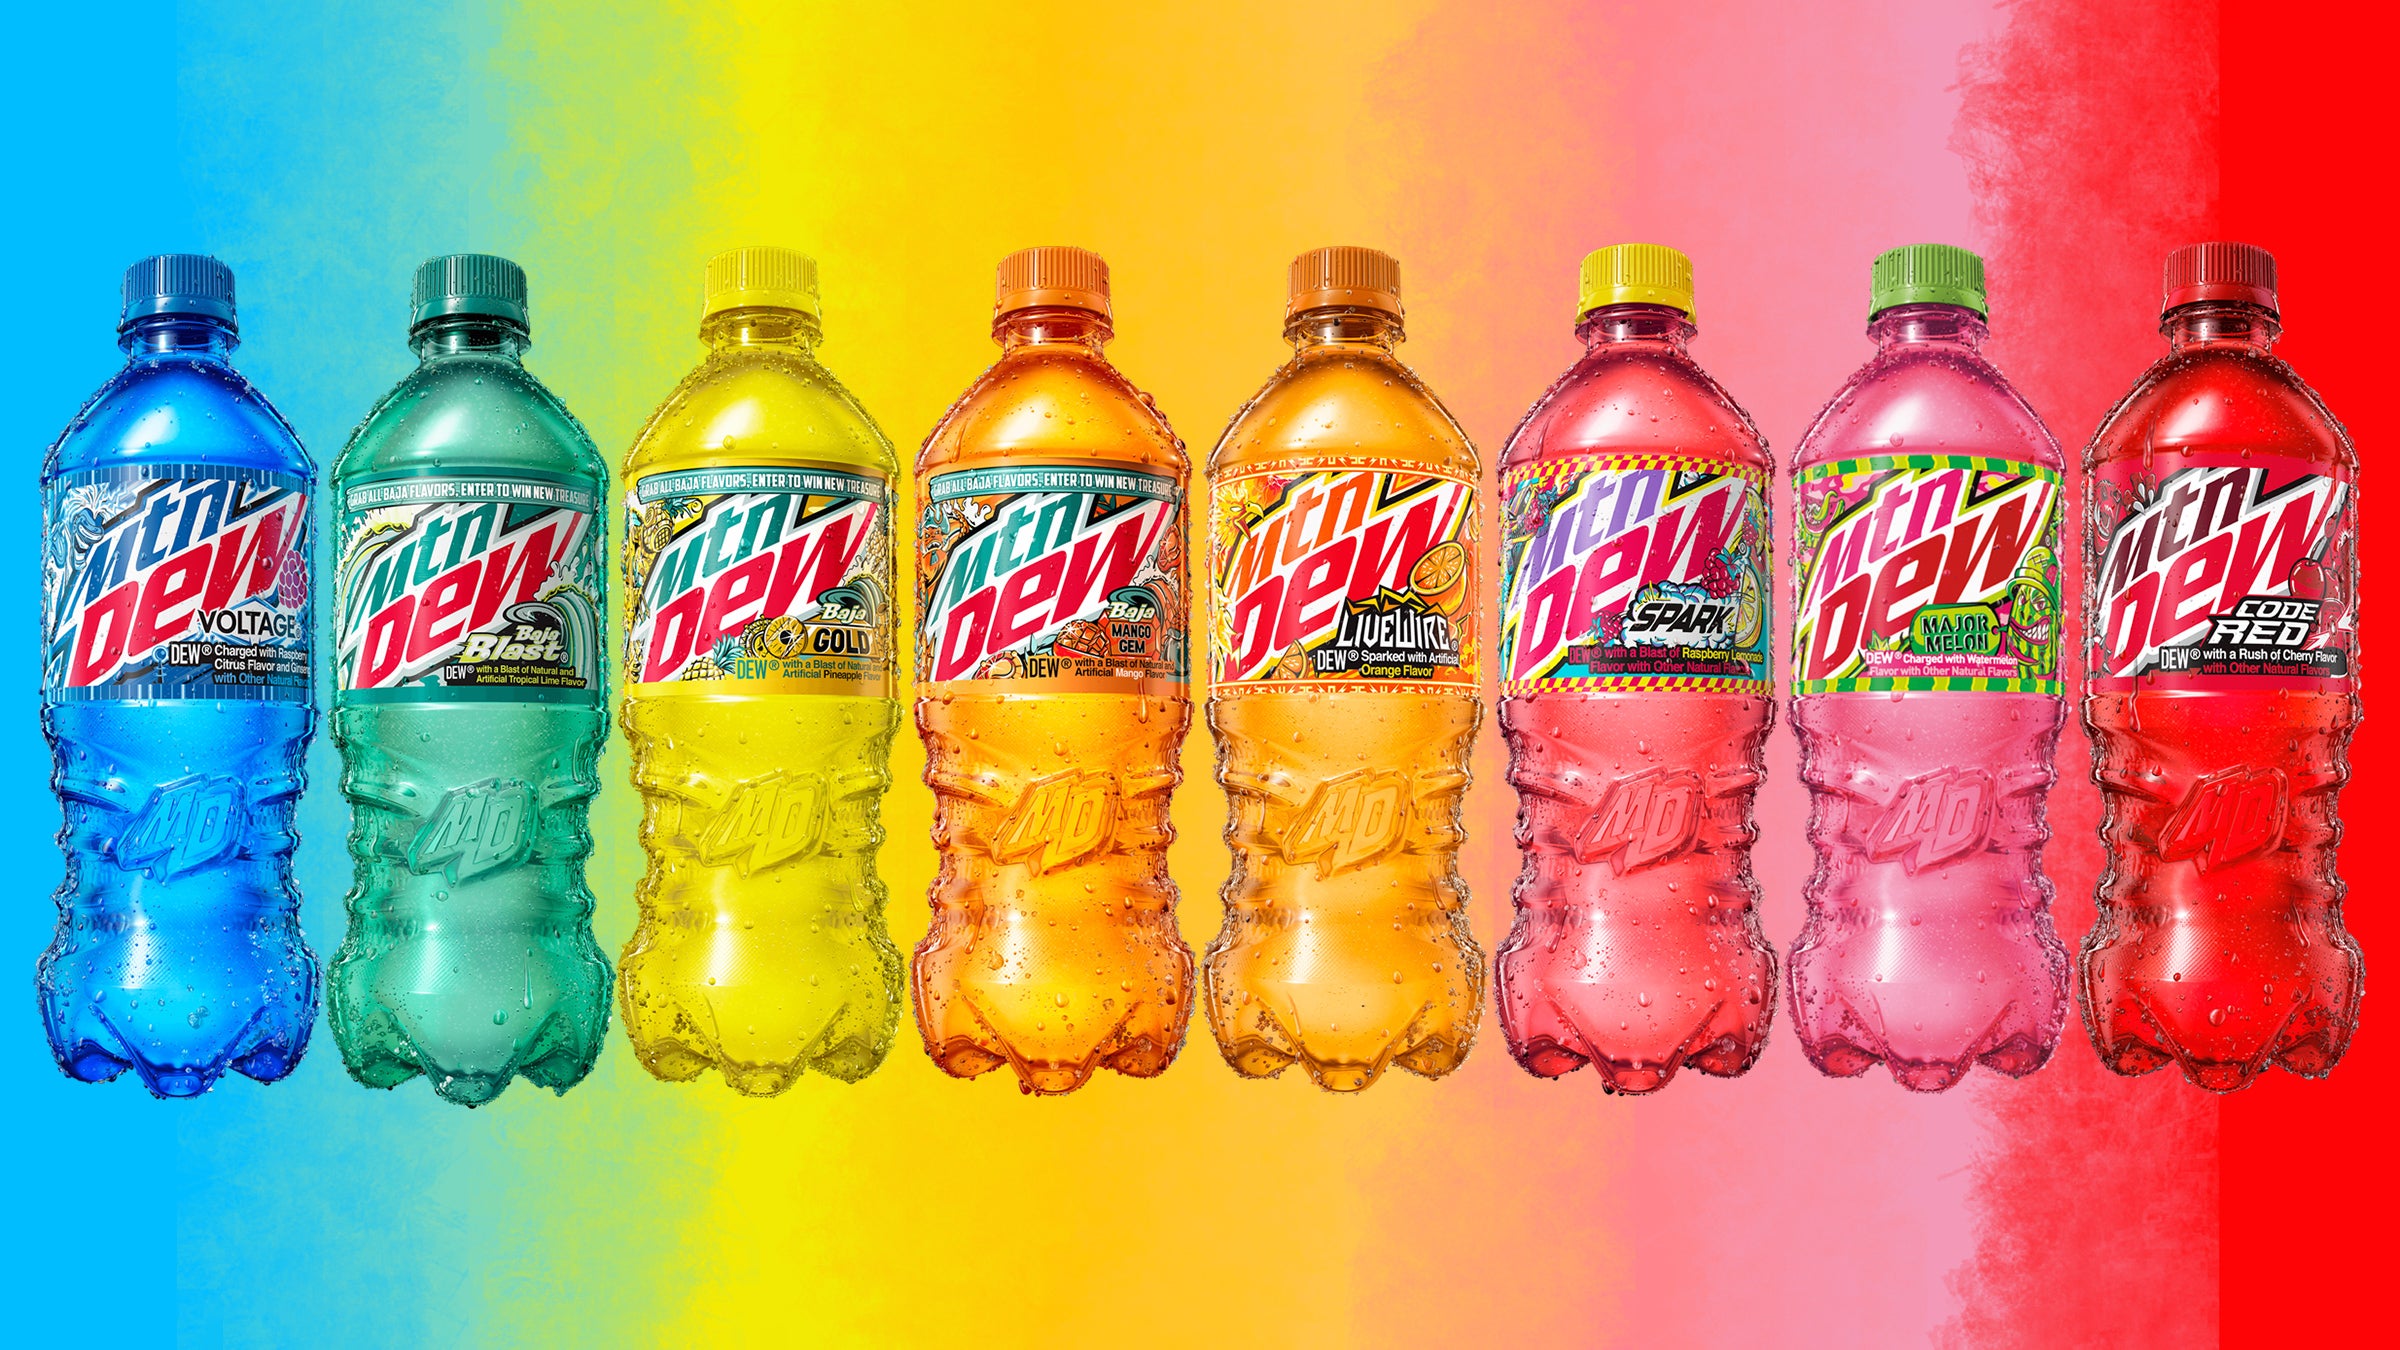 It's Time for a Mountain Dew Smackdown